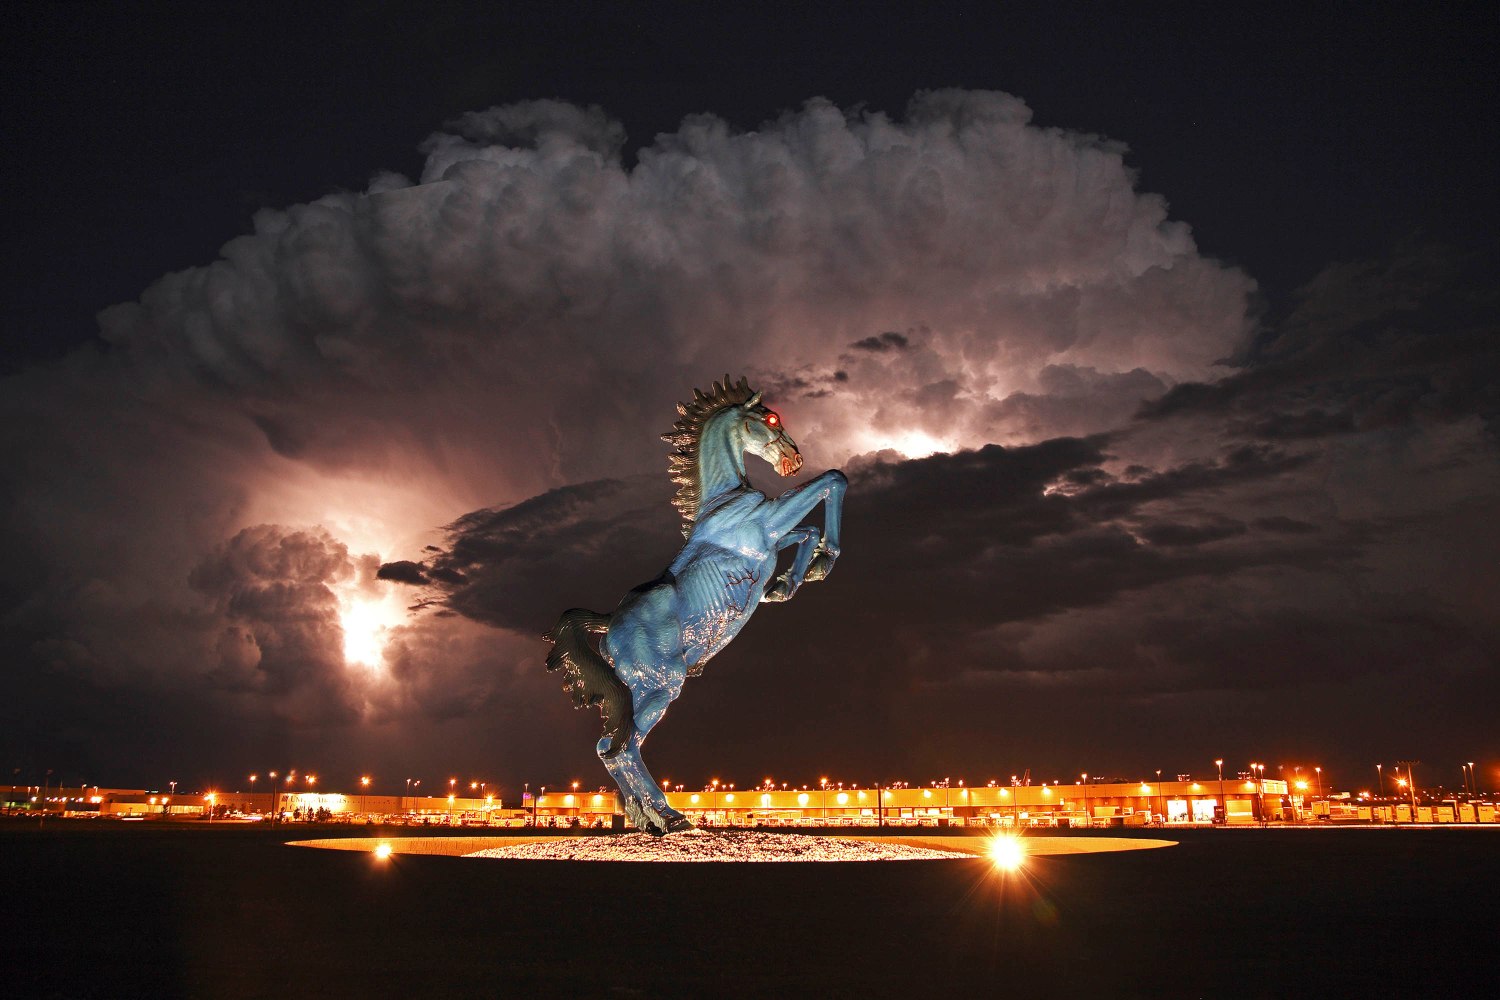 Blue Mustang: The Demon Horse of the Denver International Airport